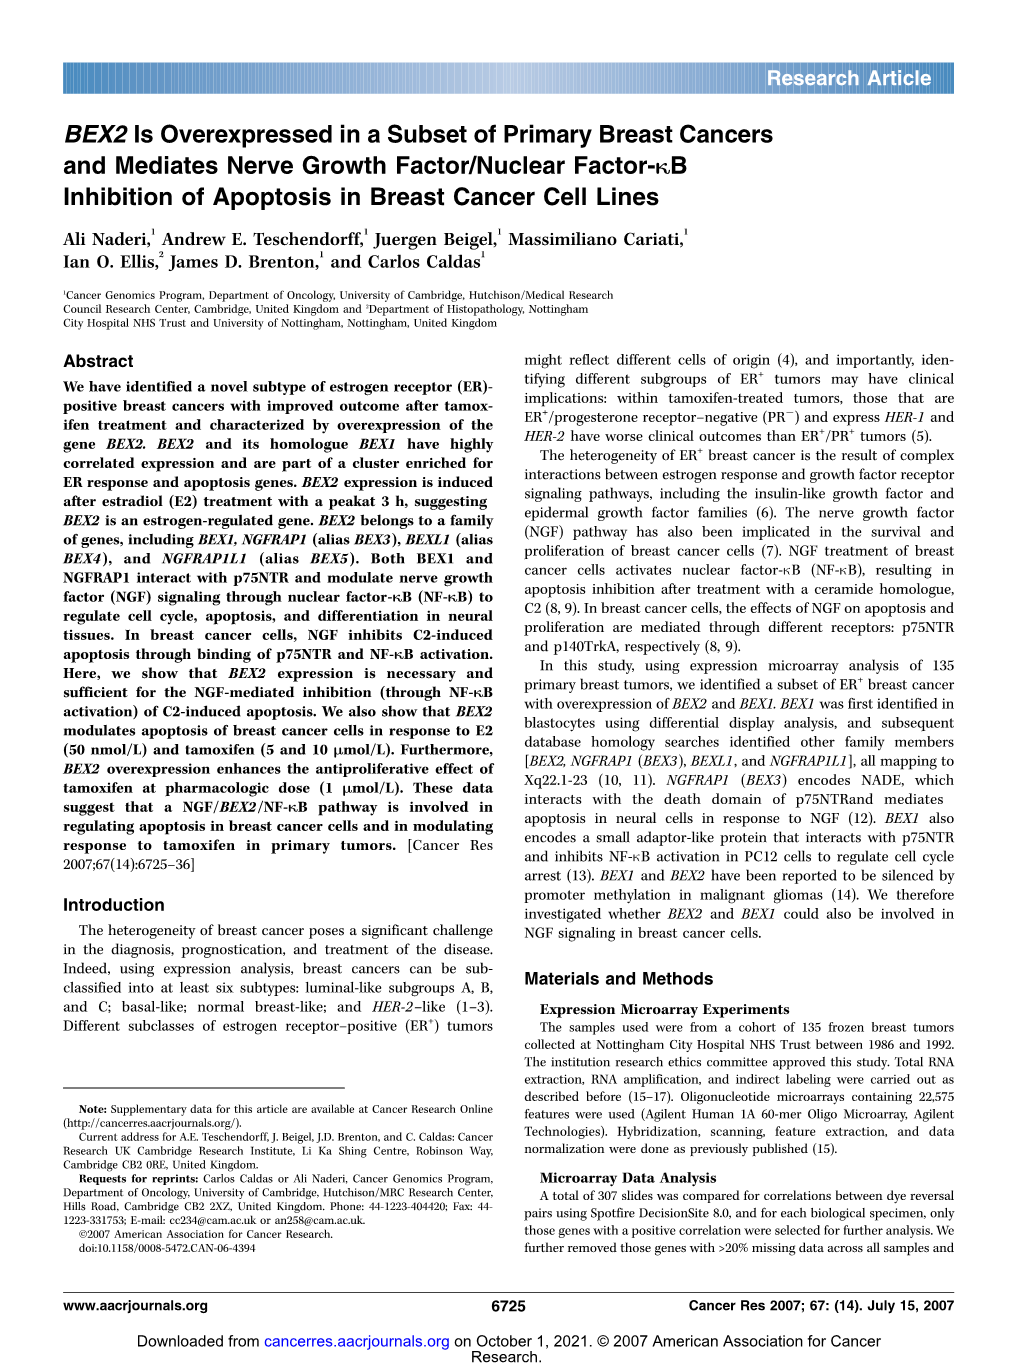 BEX2 Is Overexpressed in a Subset of Primary Breast Cancers and Mediates Nerve Growth Factor/Nuclear Factor-KB Inhibition of Apoptosis in Breast Cancer Cell Lines